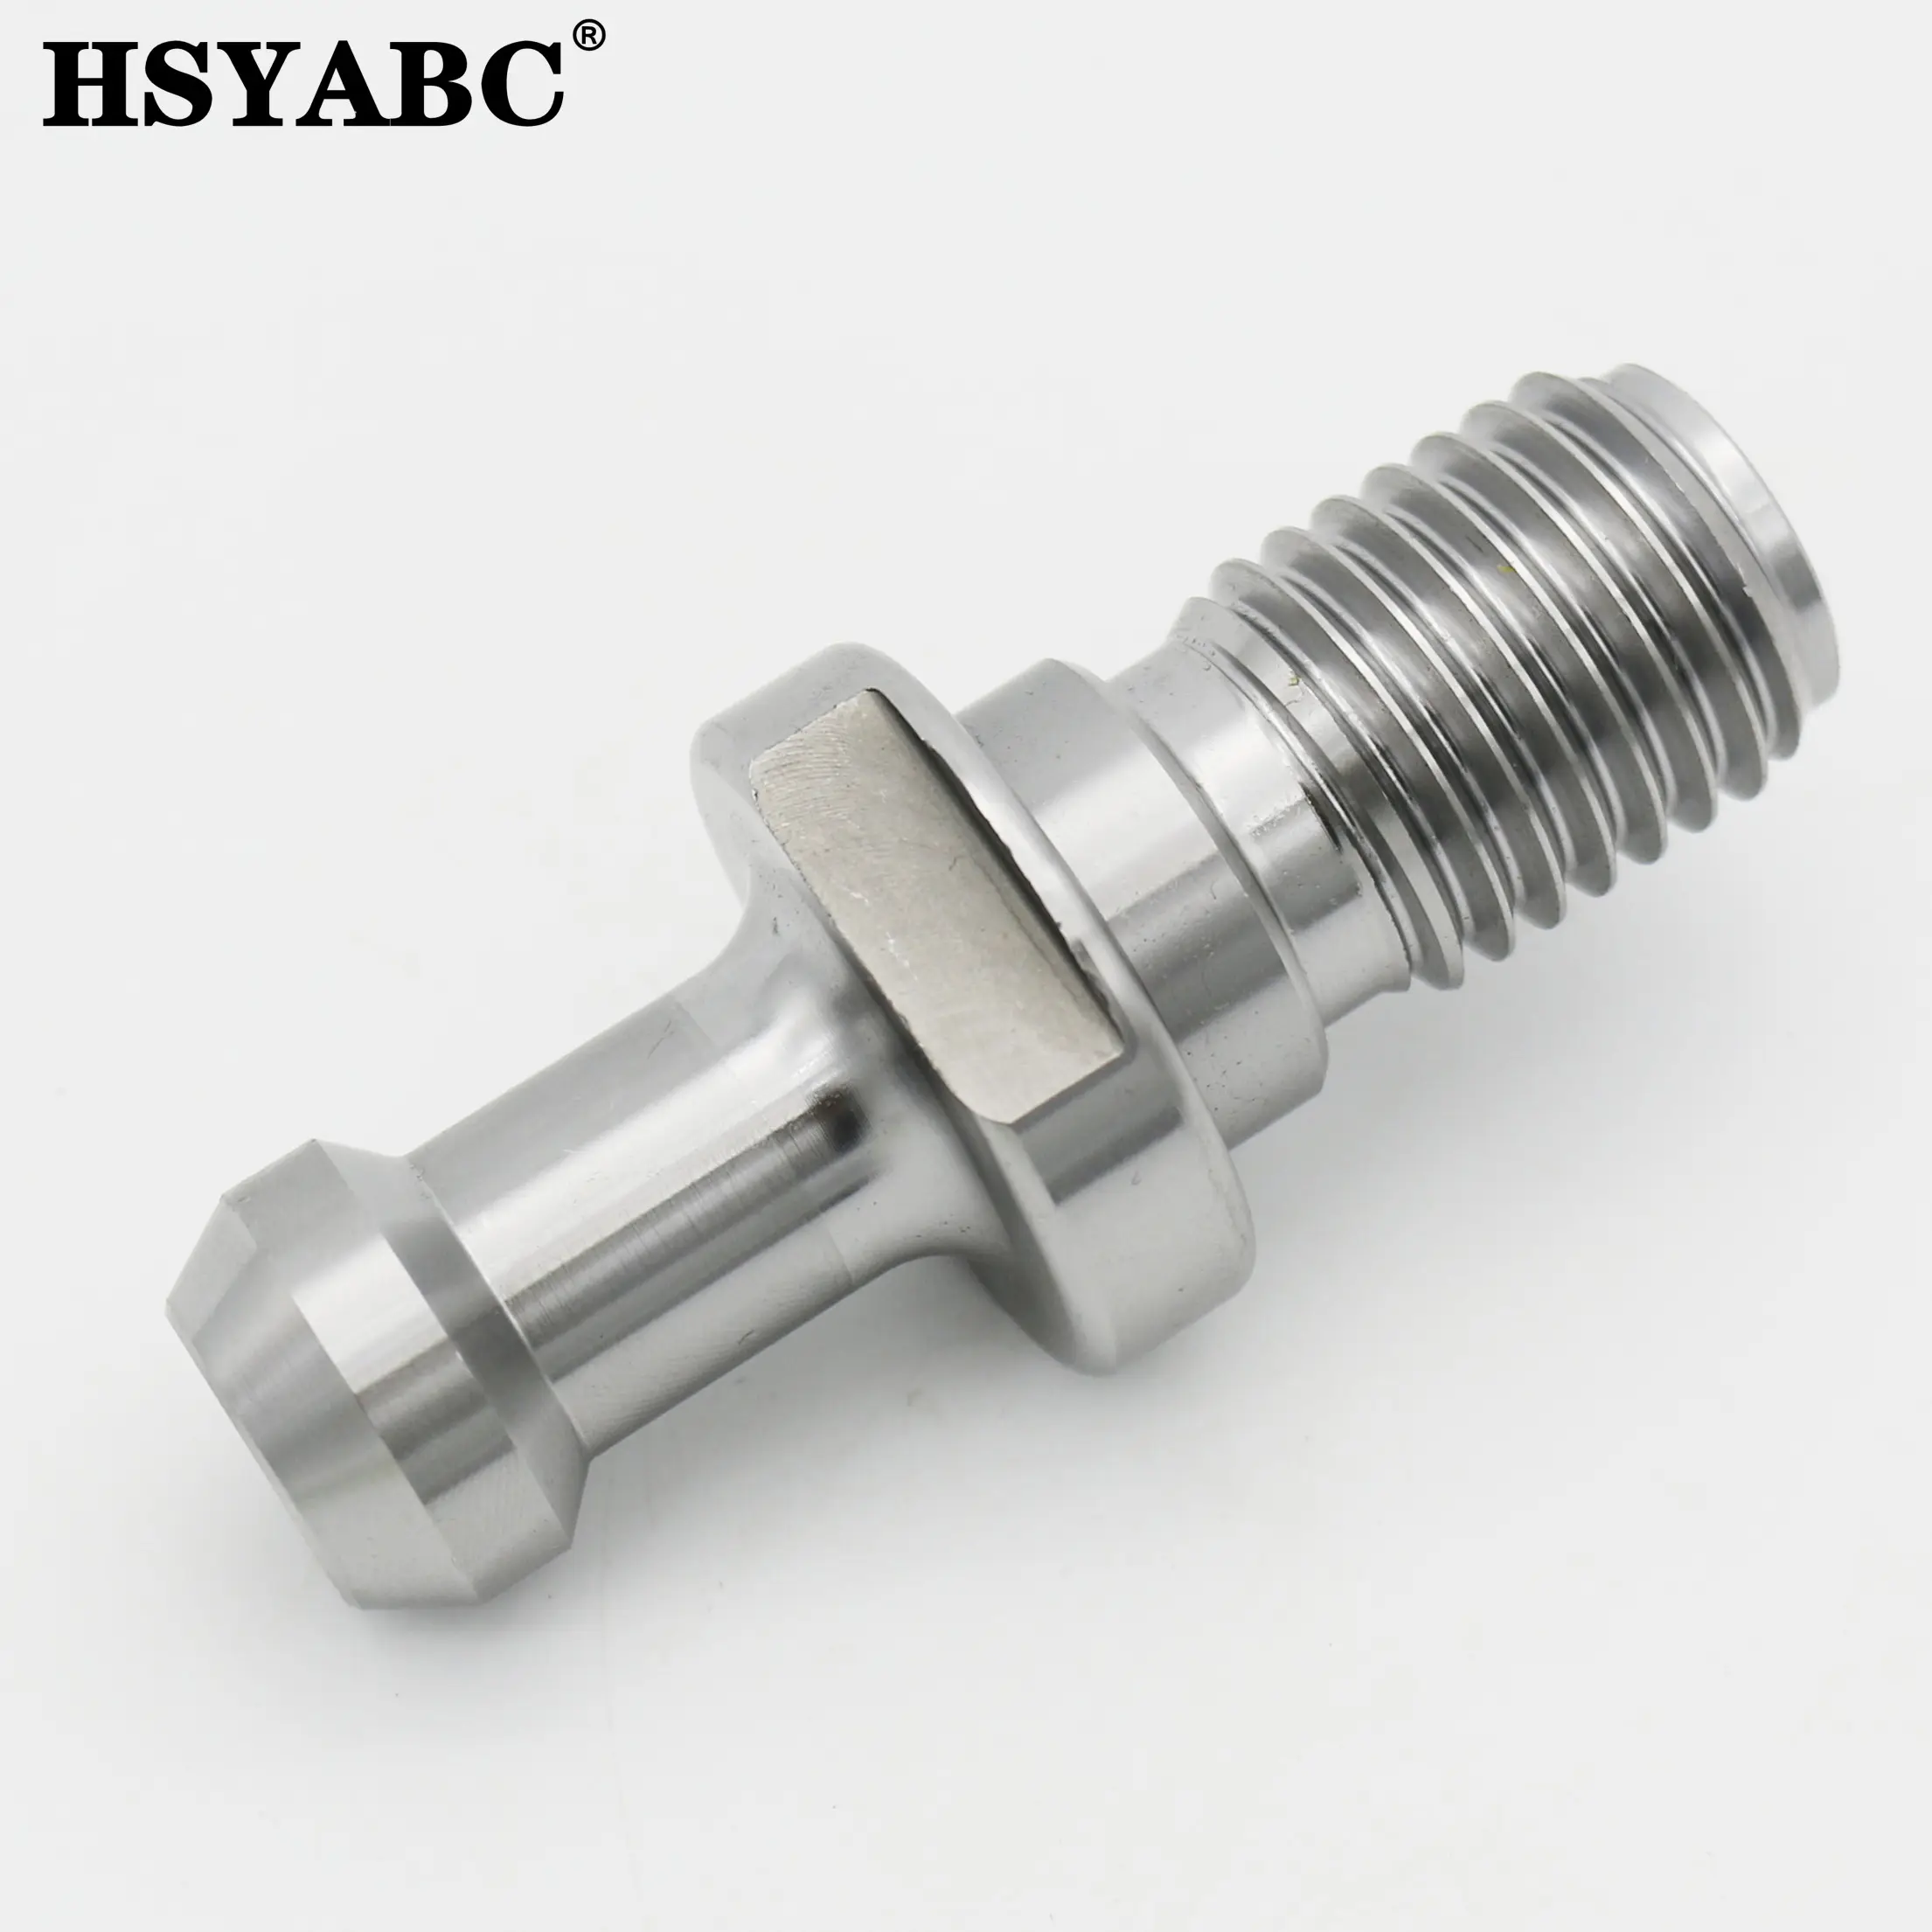 Machifit BT30 45 Degree CNC Puller Bolt Pull Stud for CNC Milling Collet Chuck Tool Holder/ BT pull studs